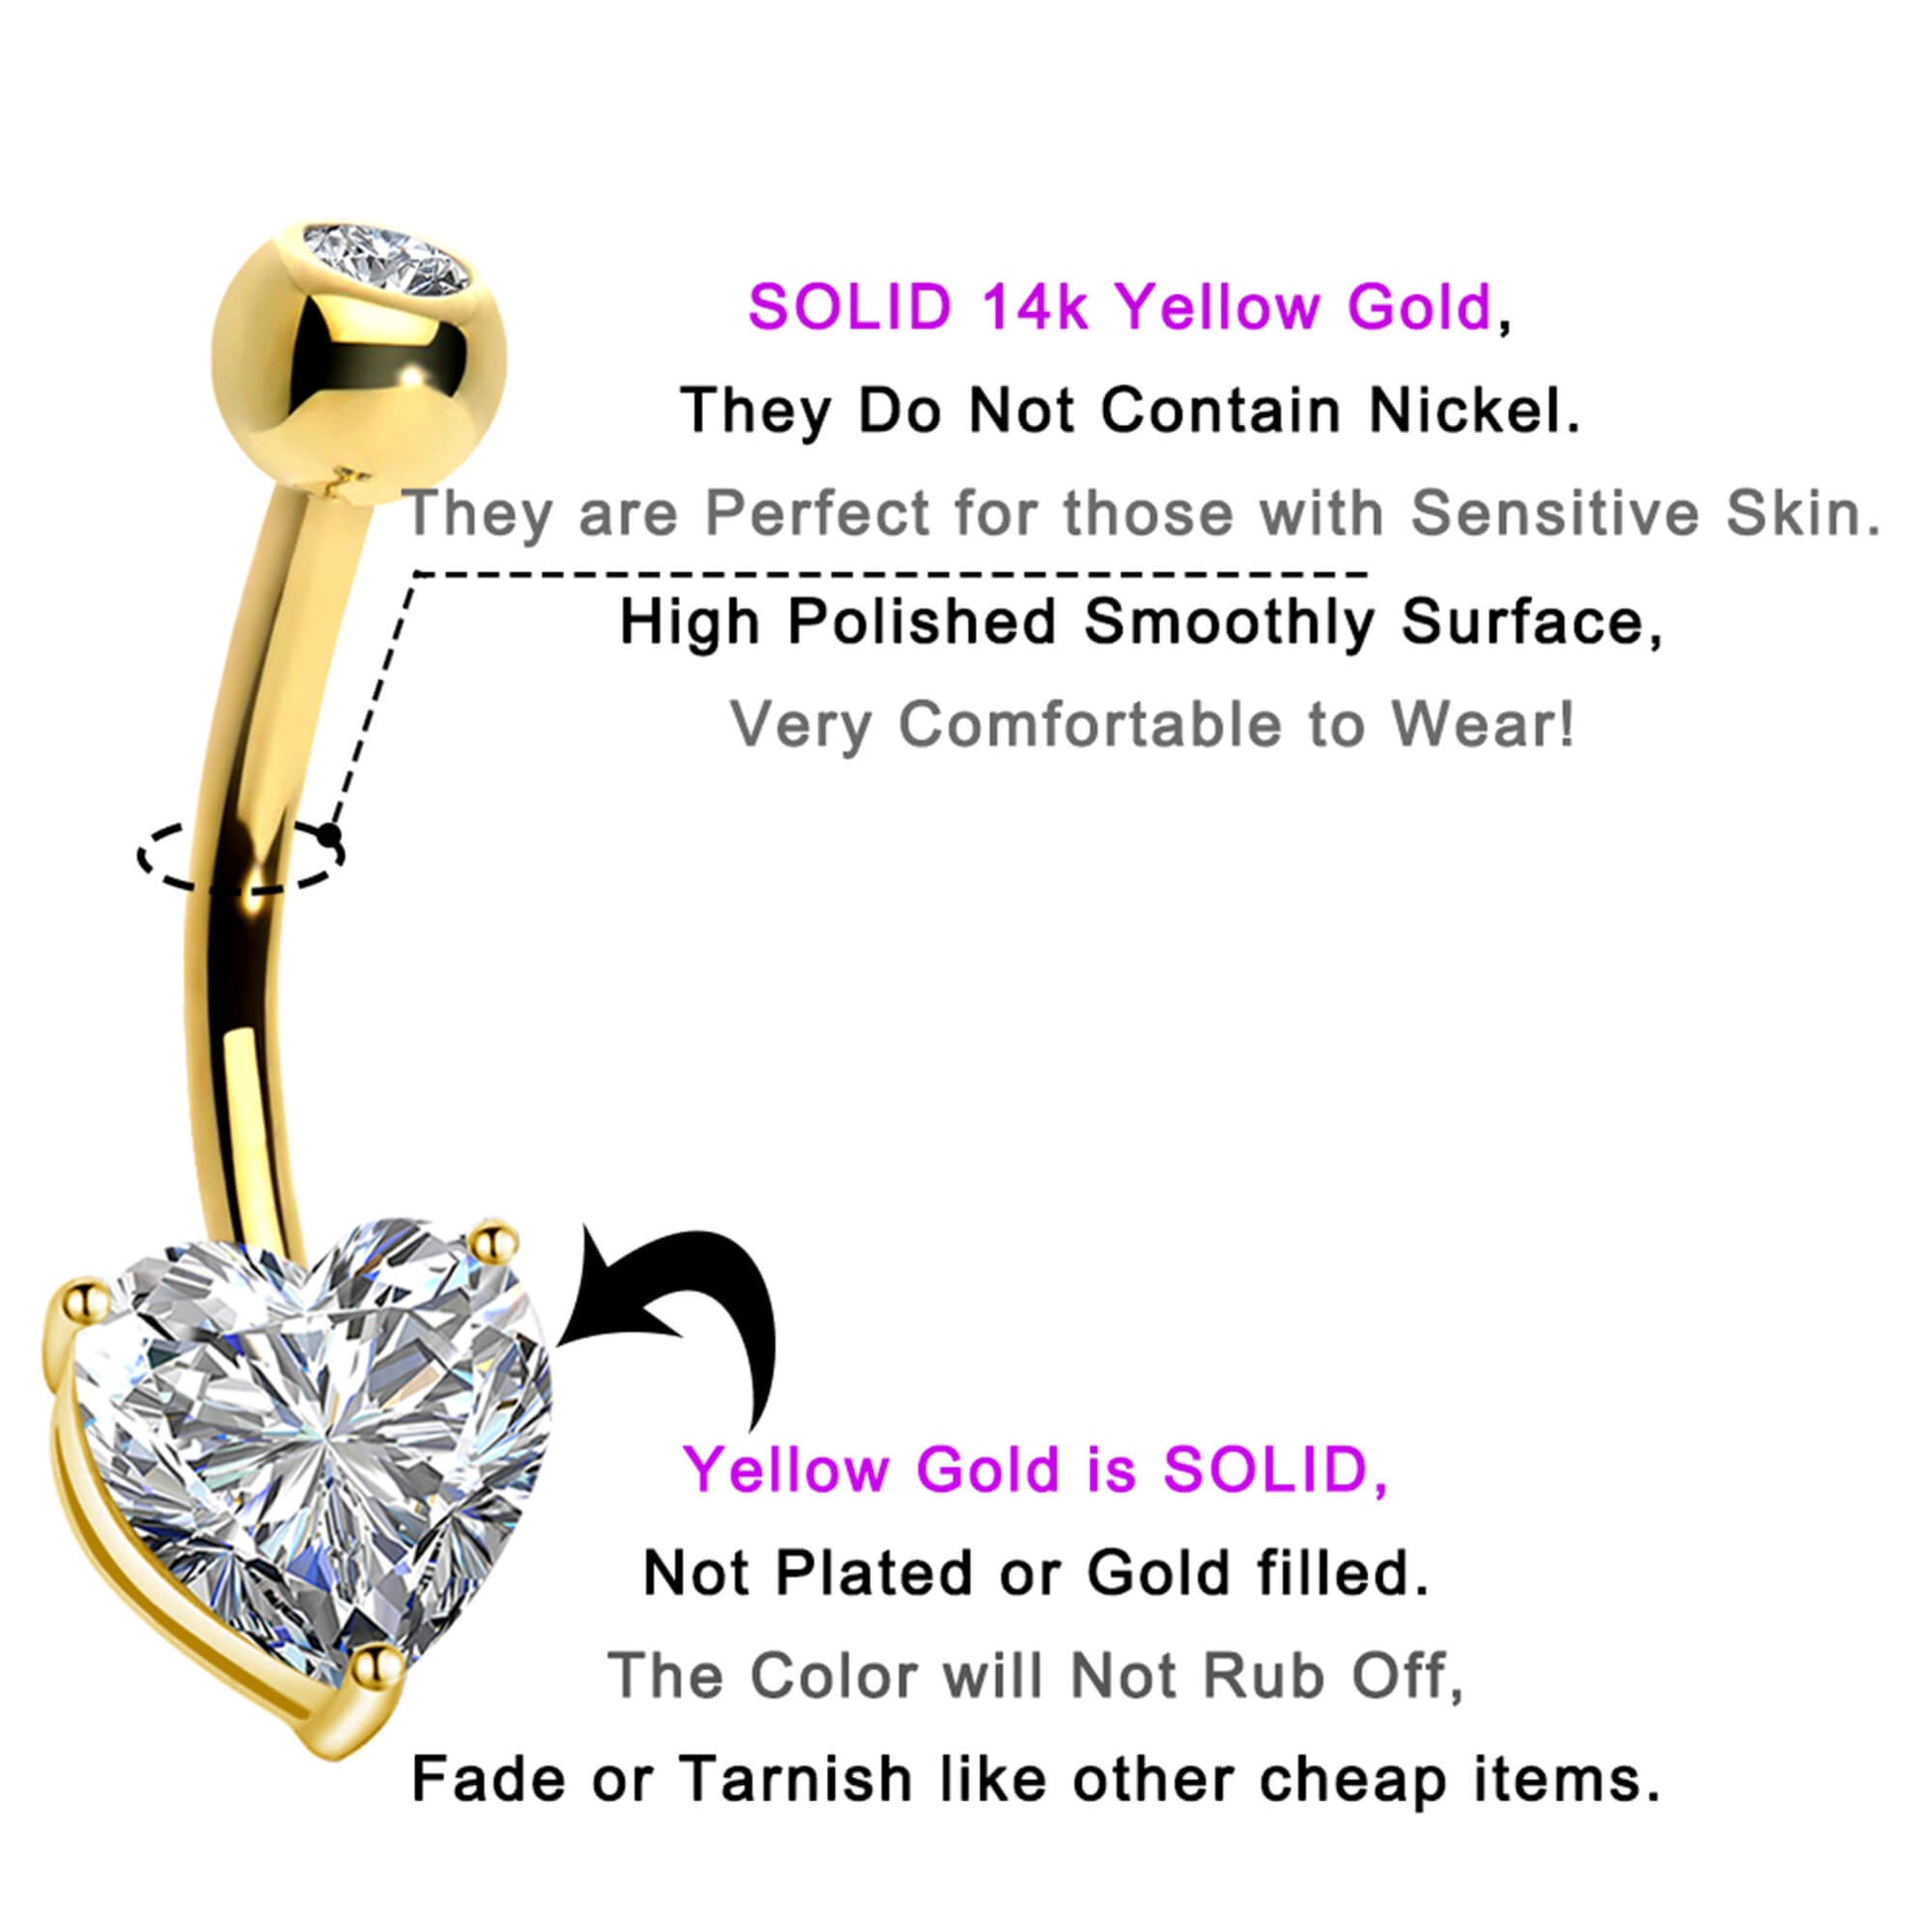 14K Gold Belly Button Rings 14G Heart Solitaire CZ Navel Ring - OUFER BODY JEWELRY 